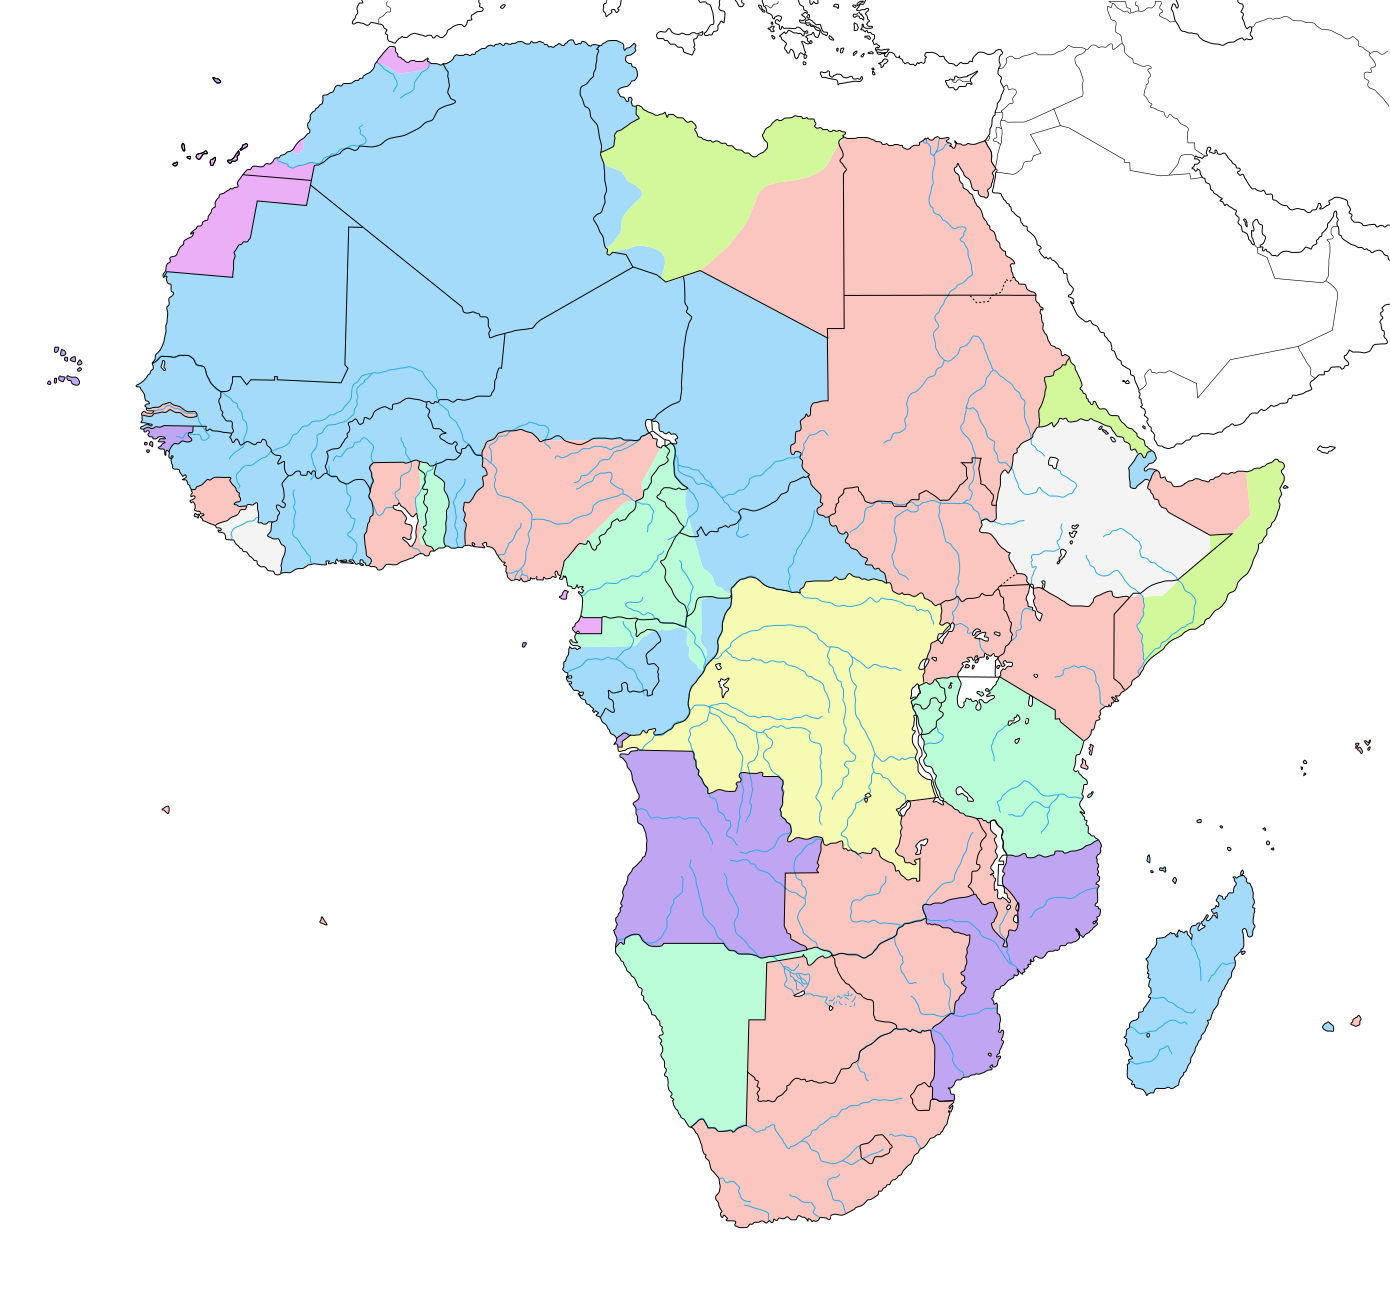 File:Colonial Africa 1913 map.svg - Wikimedia Commons